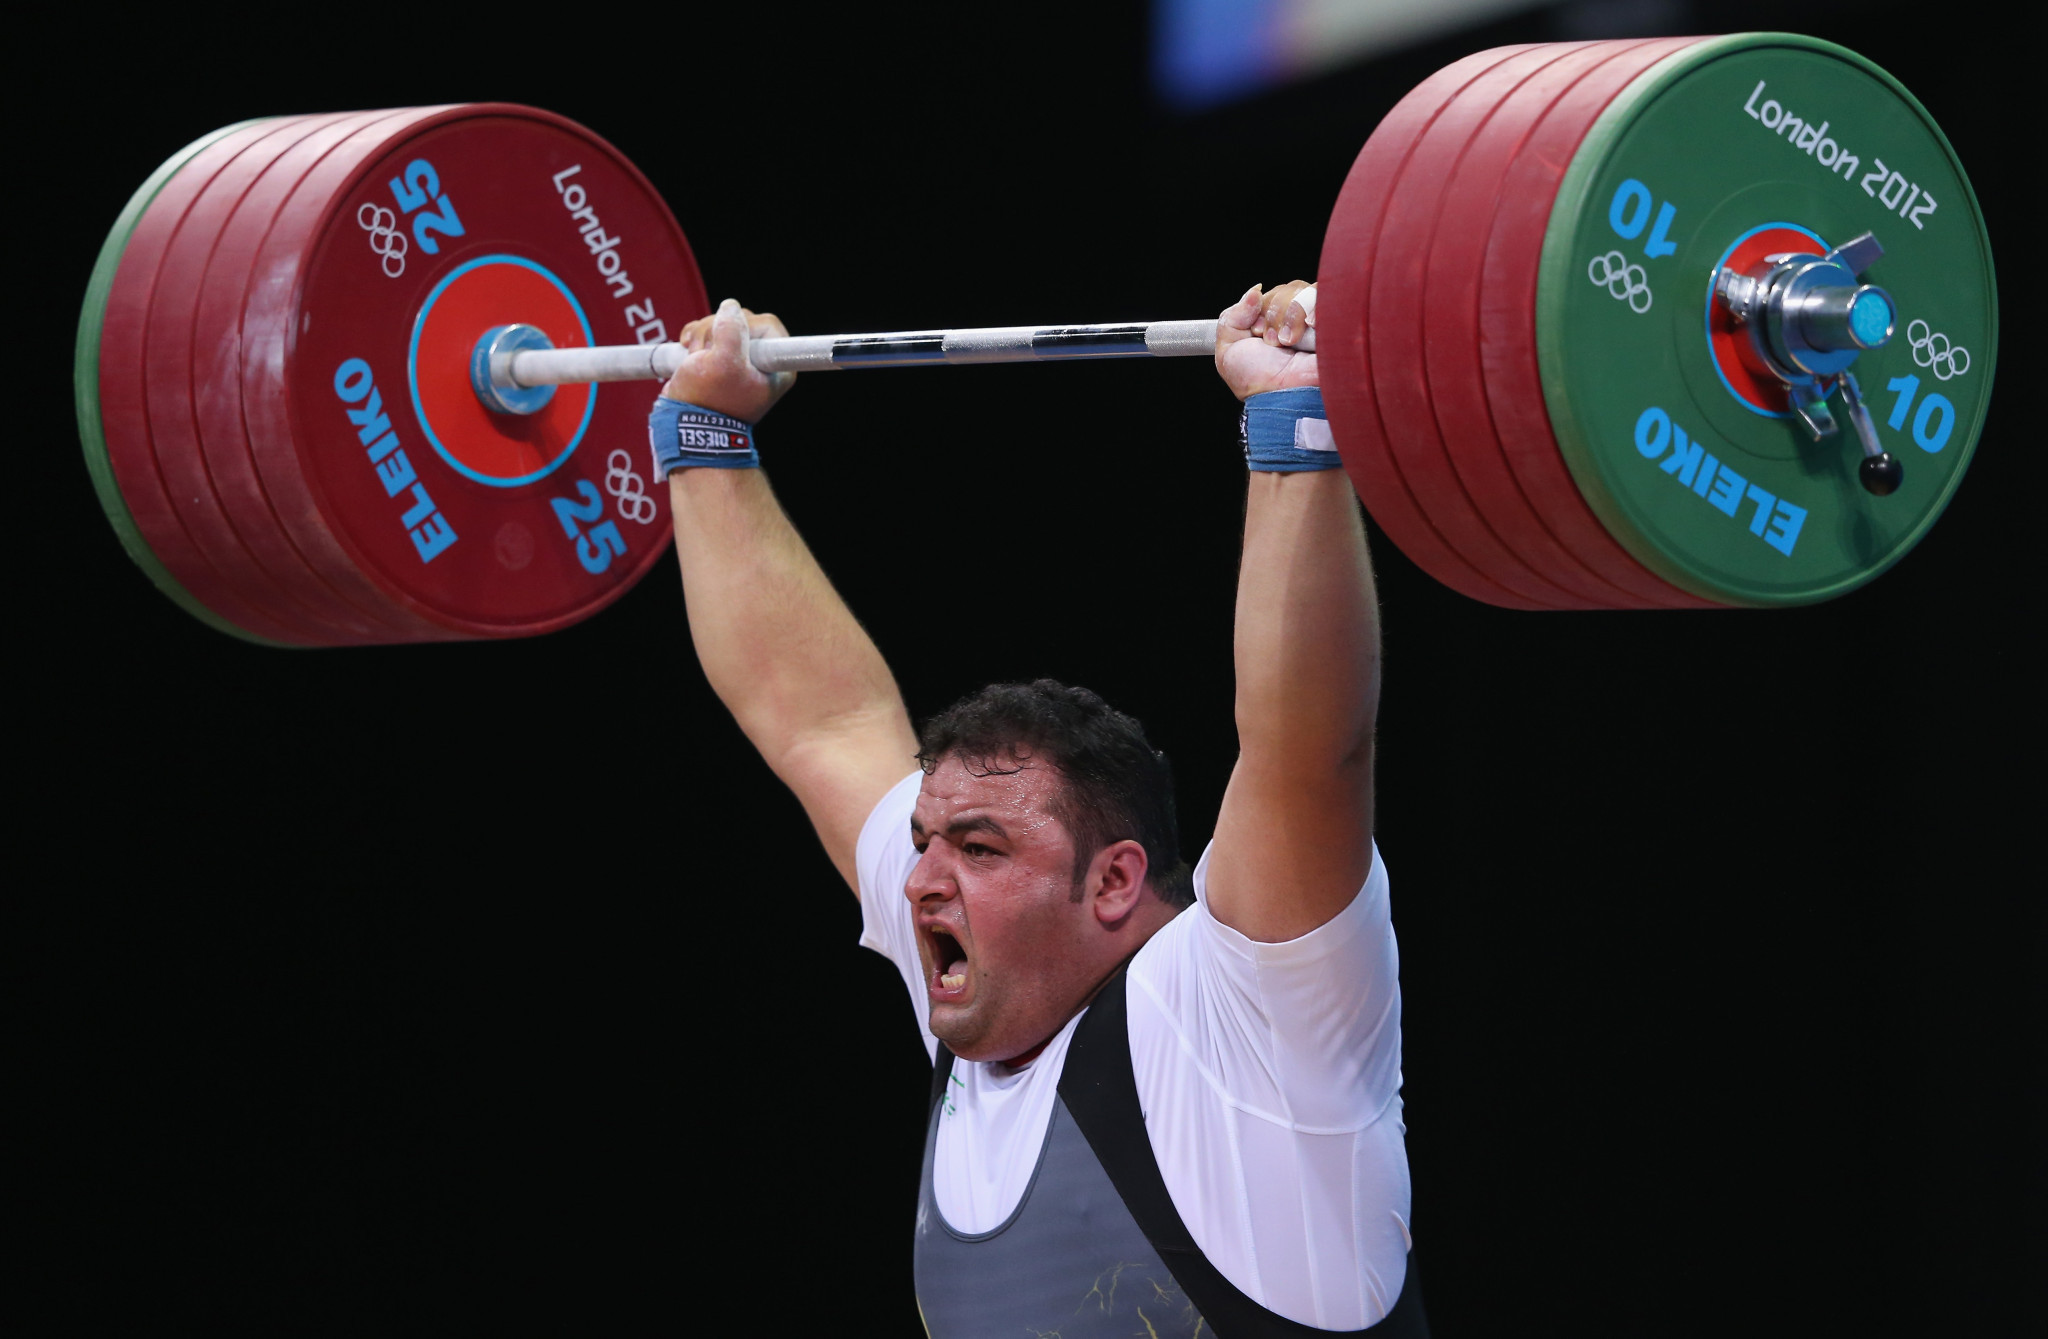 Ali Moradi has been temporarily replaced by London 2012 Olympic silver medallist Sajjad Anoushiravani ©Getty Images